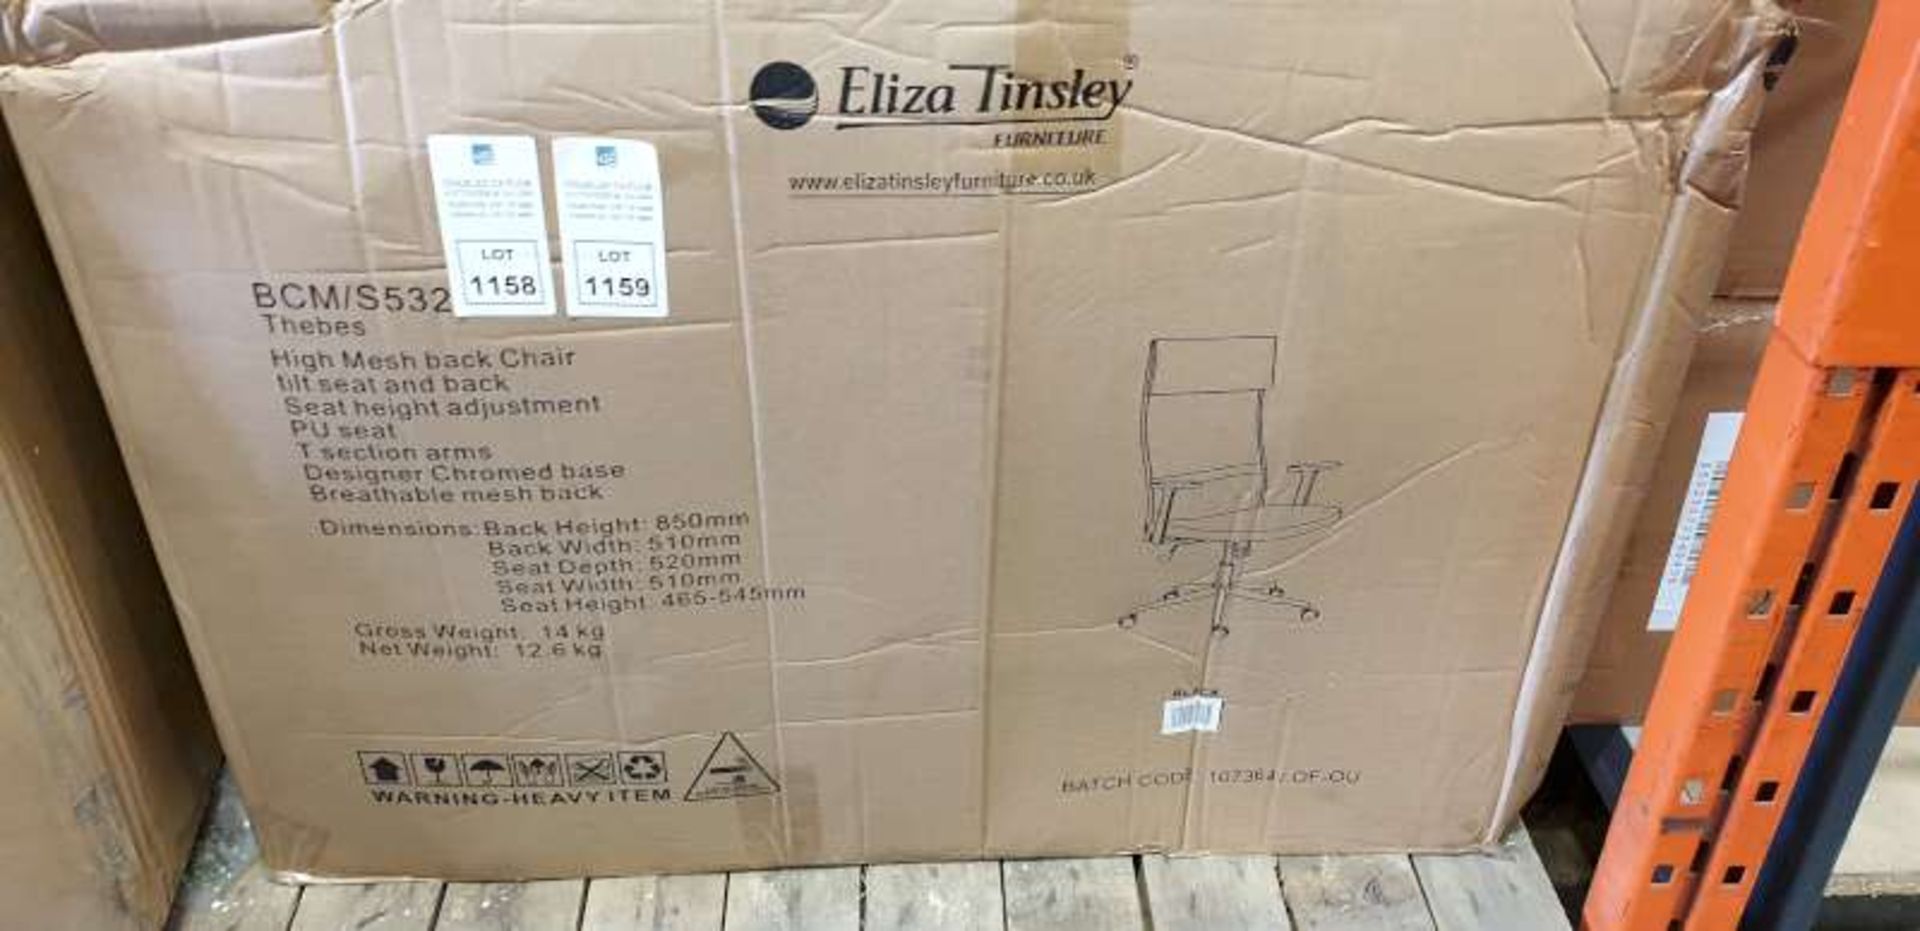 3 X BRAND NEW BOXED ELIZA TINSLEY HIGH MESH BACK OFFICE CHAIRS